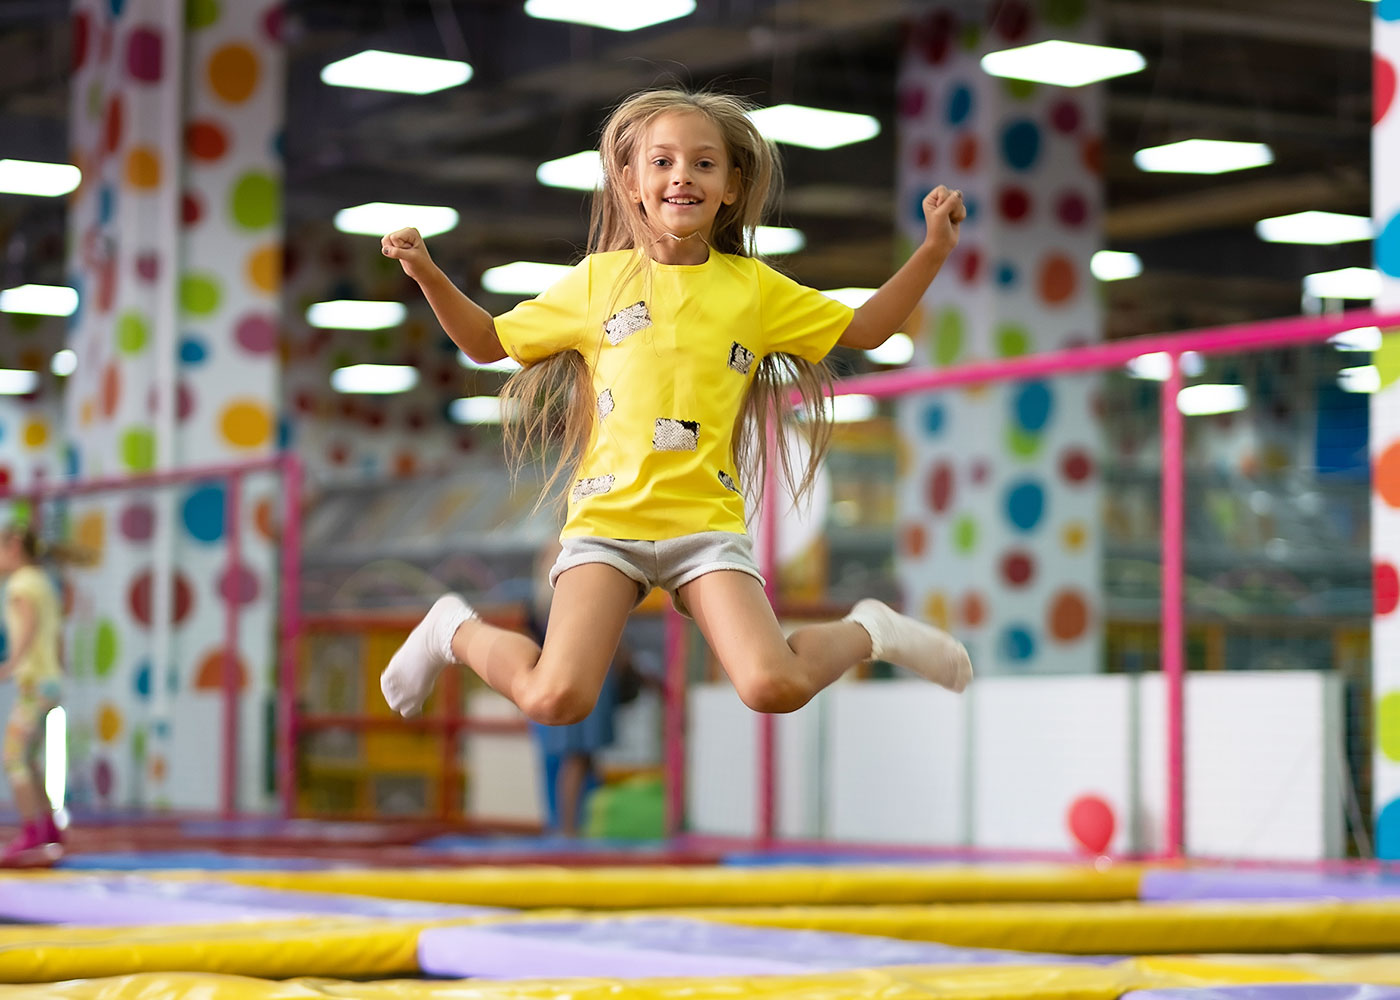 19 trampoline parks in Michigan that'll make your kids JUMP for joy!